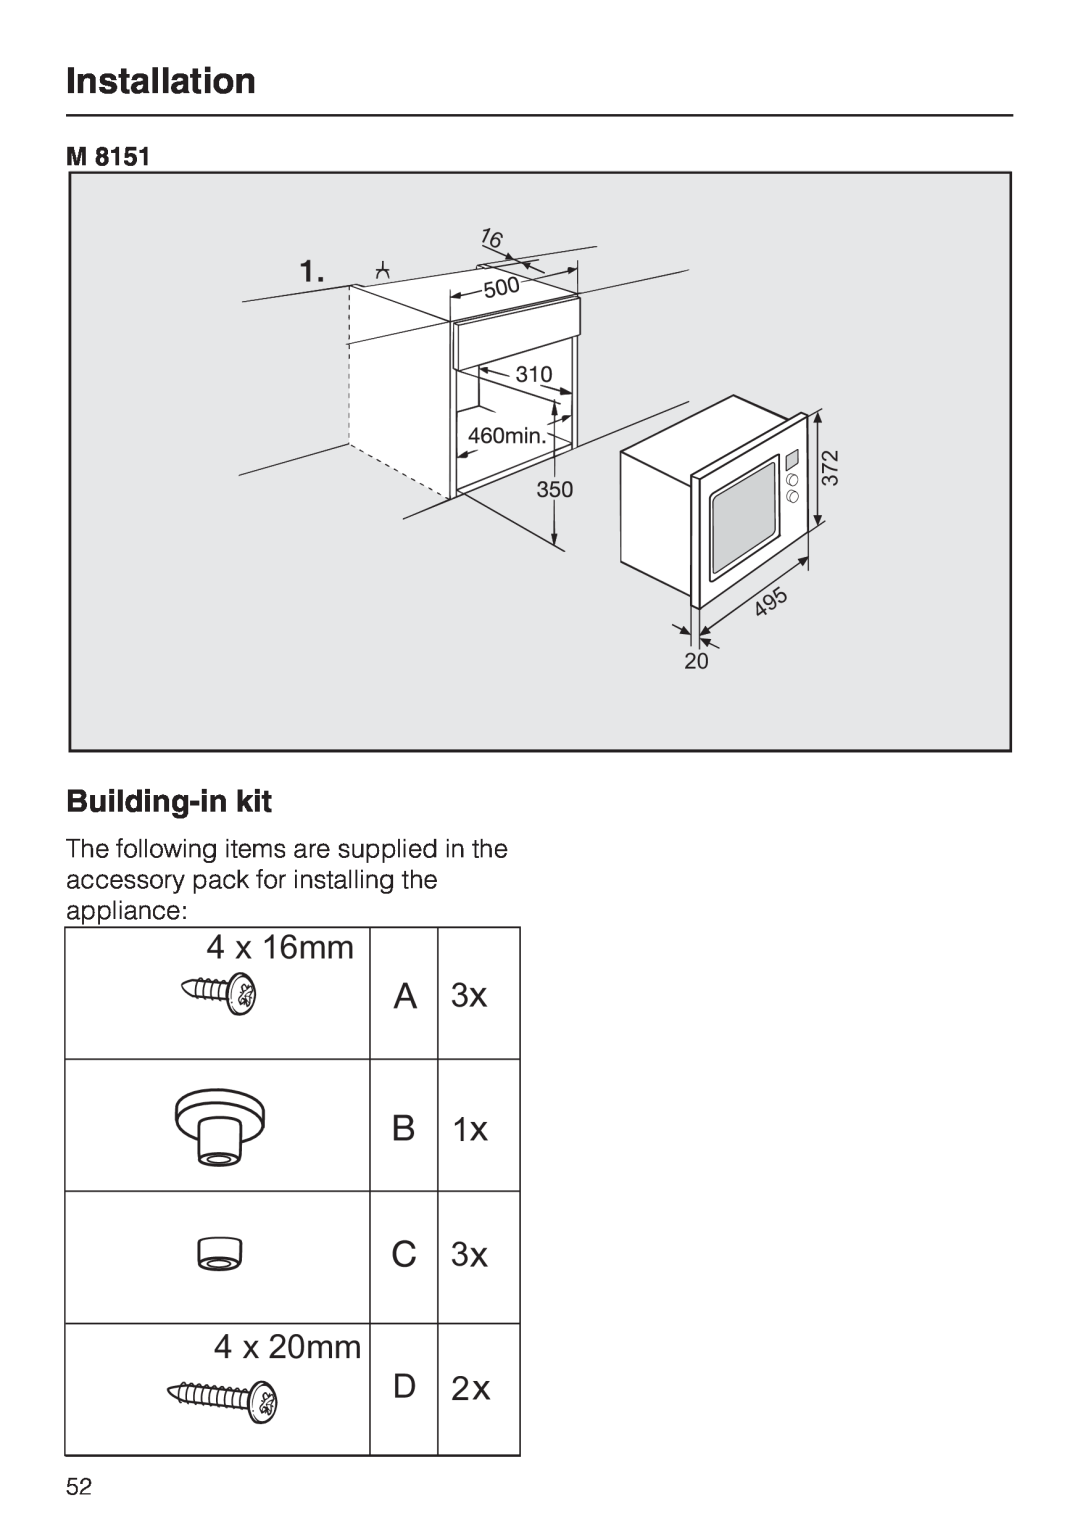 Miele M 8151-1, M 8161-1 manual Building-in kit, Installation, 4 x 16mm, 4 x 20mm D 